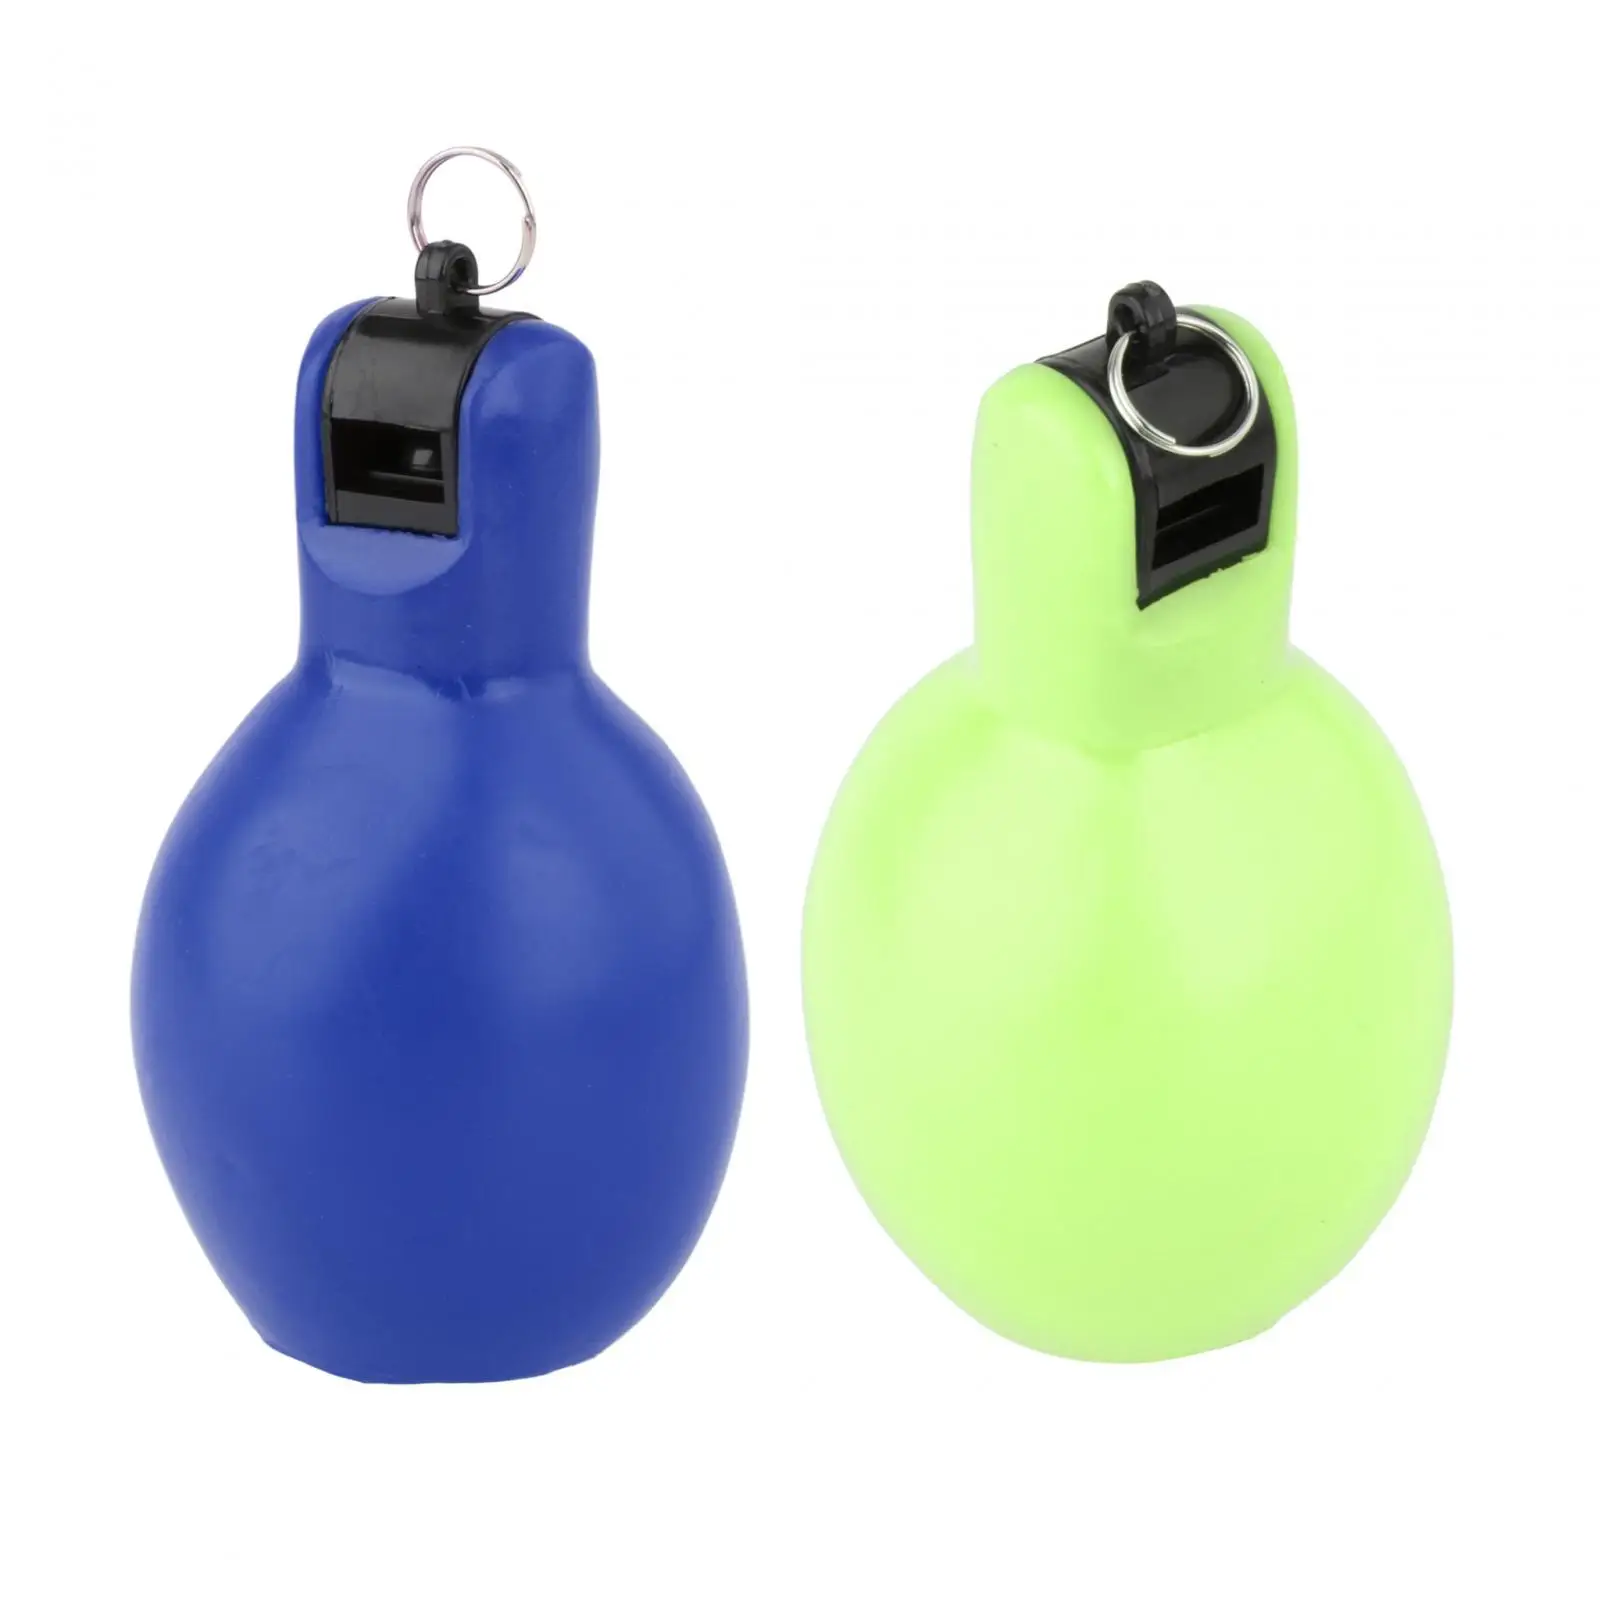 2x Hand Squeeze Whistles Lightweight Loud Sound Handheld Sports Whistle for